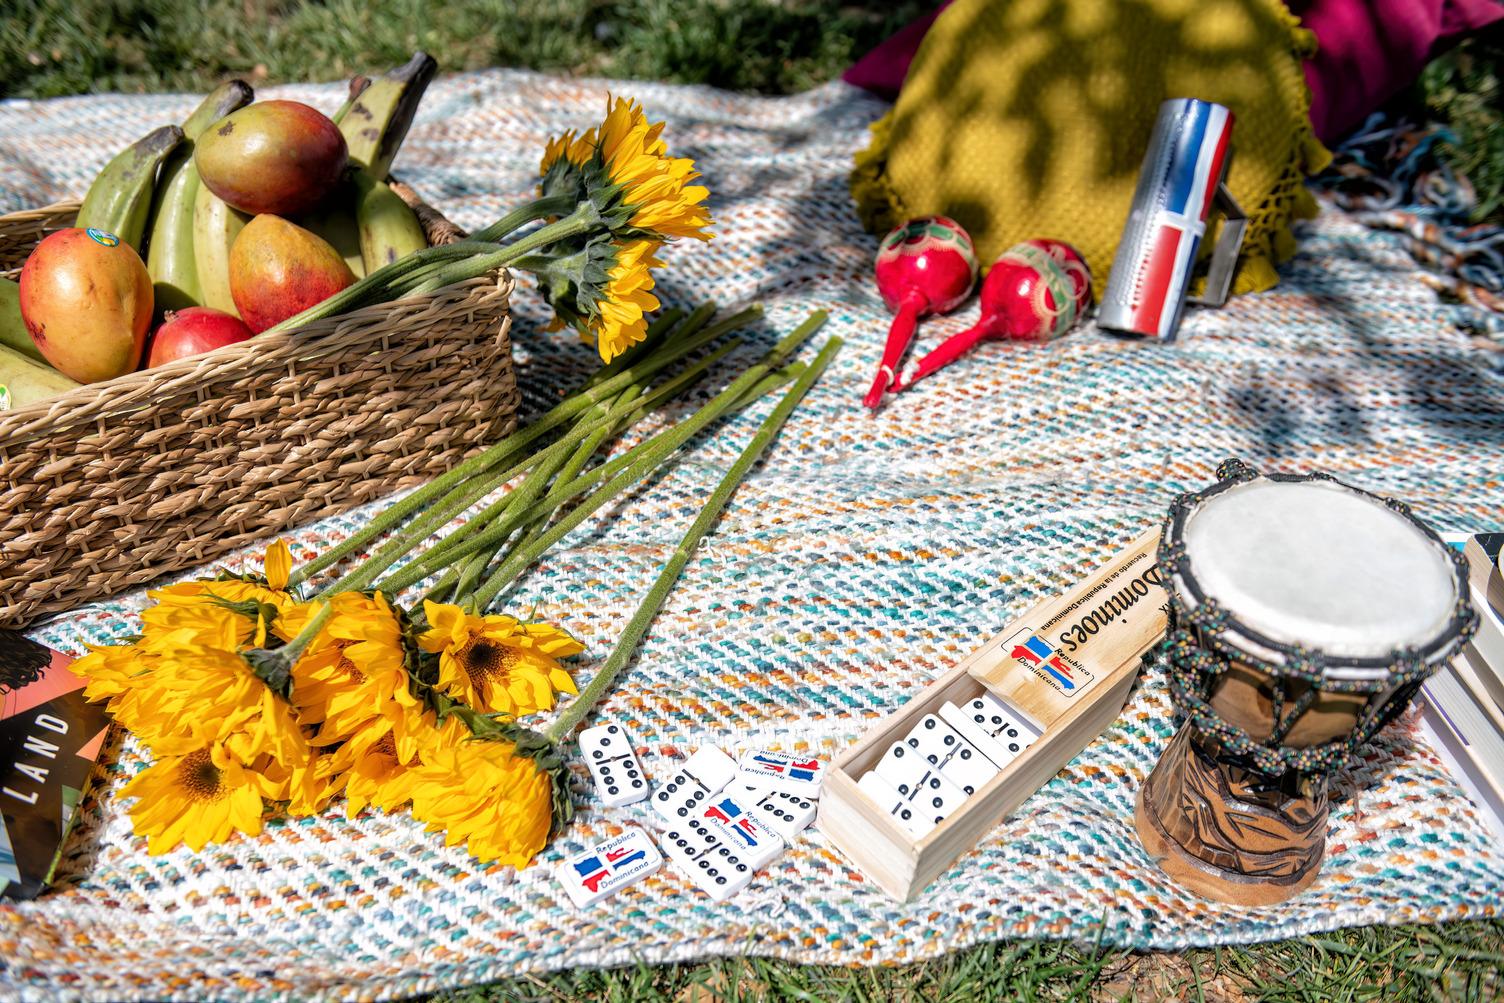 sunflowers, fruit, instruments on a blanket